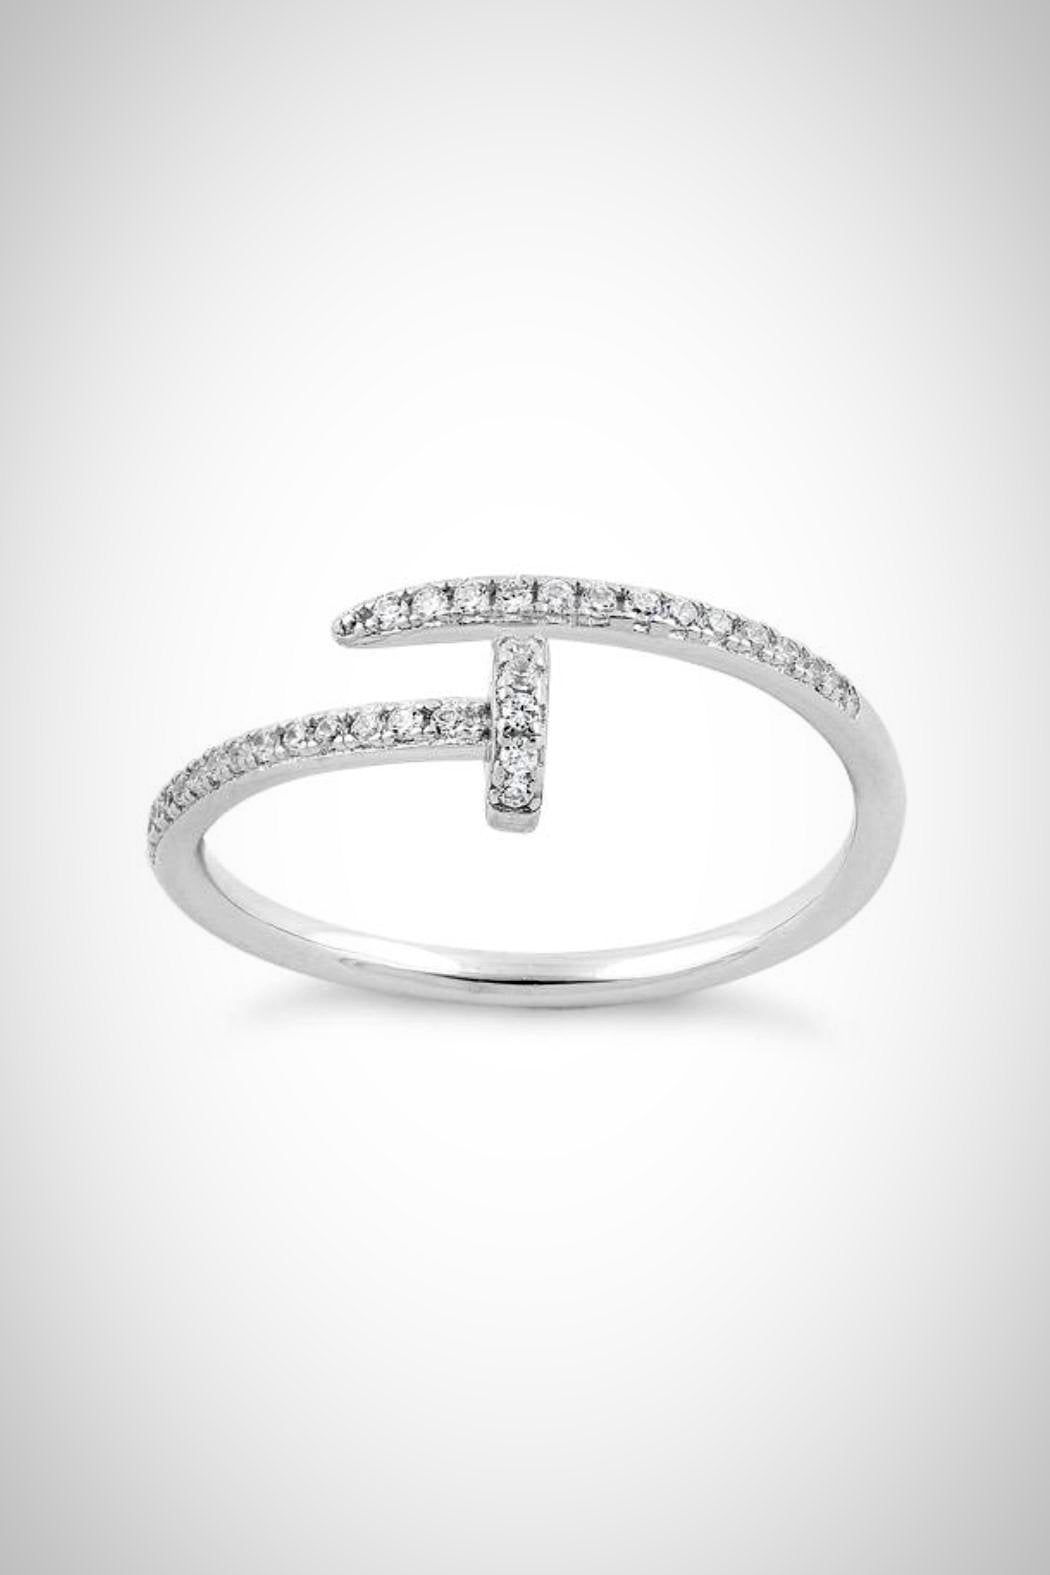 Sterling Nail It CZ Ring - Embellish Your Life 